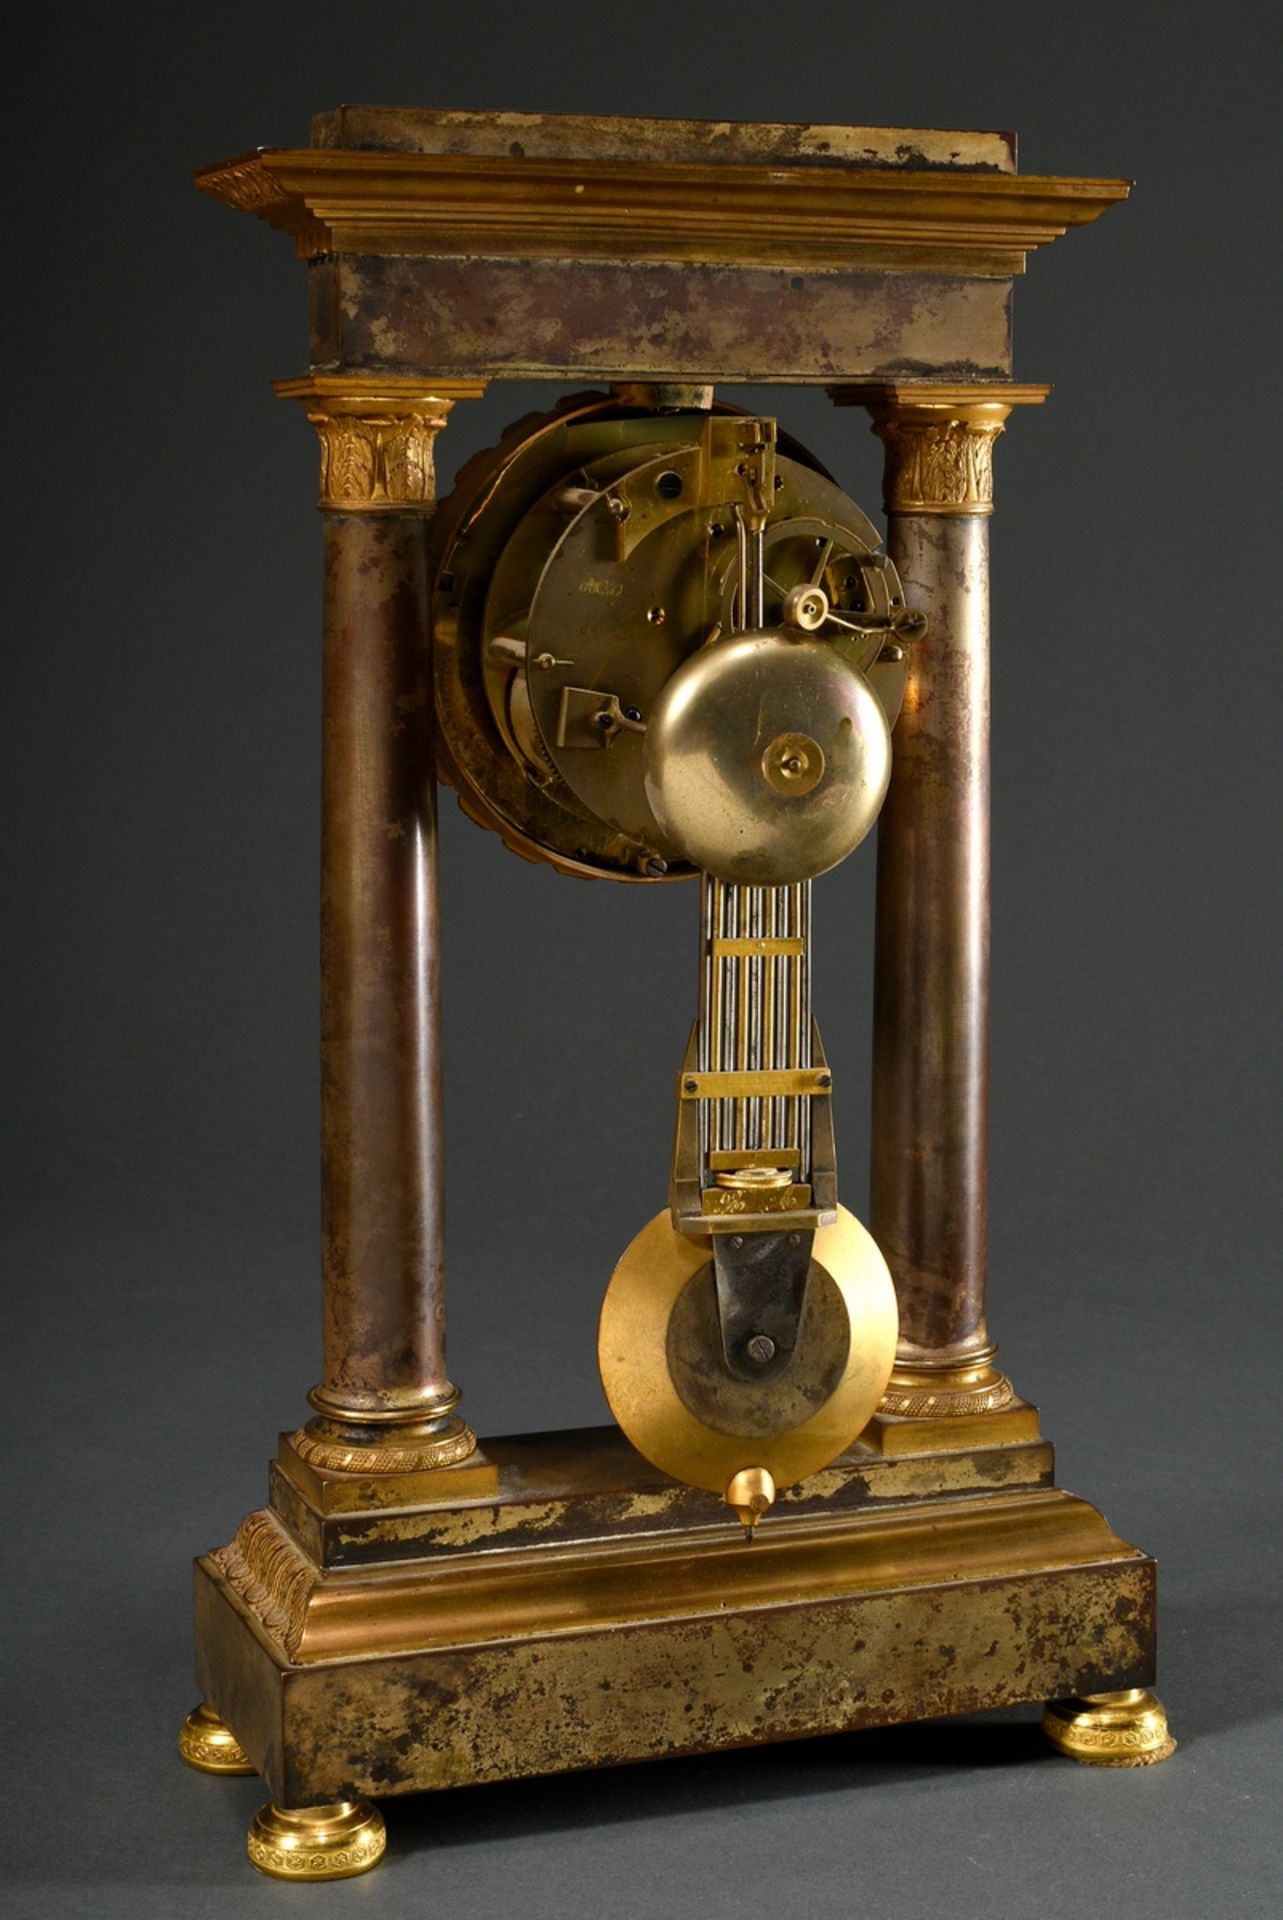 Biedermeier portal clock with patinated and fire-gilt case, floral relief dial with Roman numerals, - Image 6 of 9